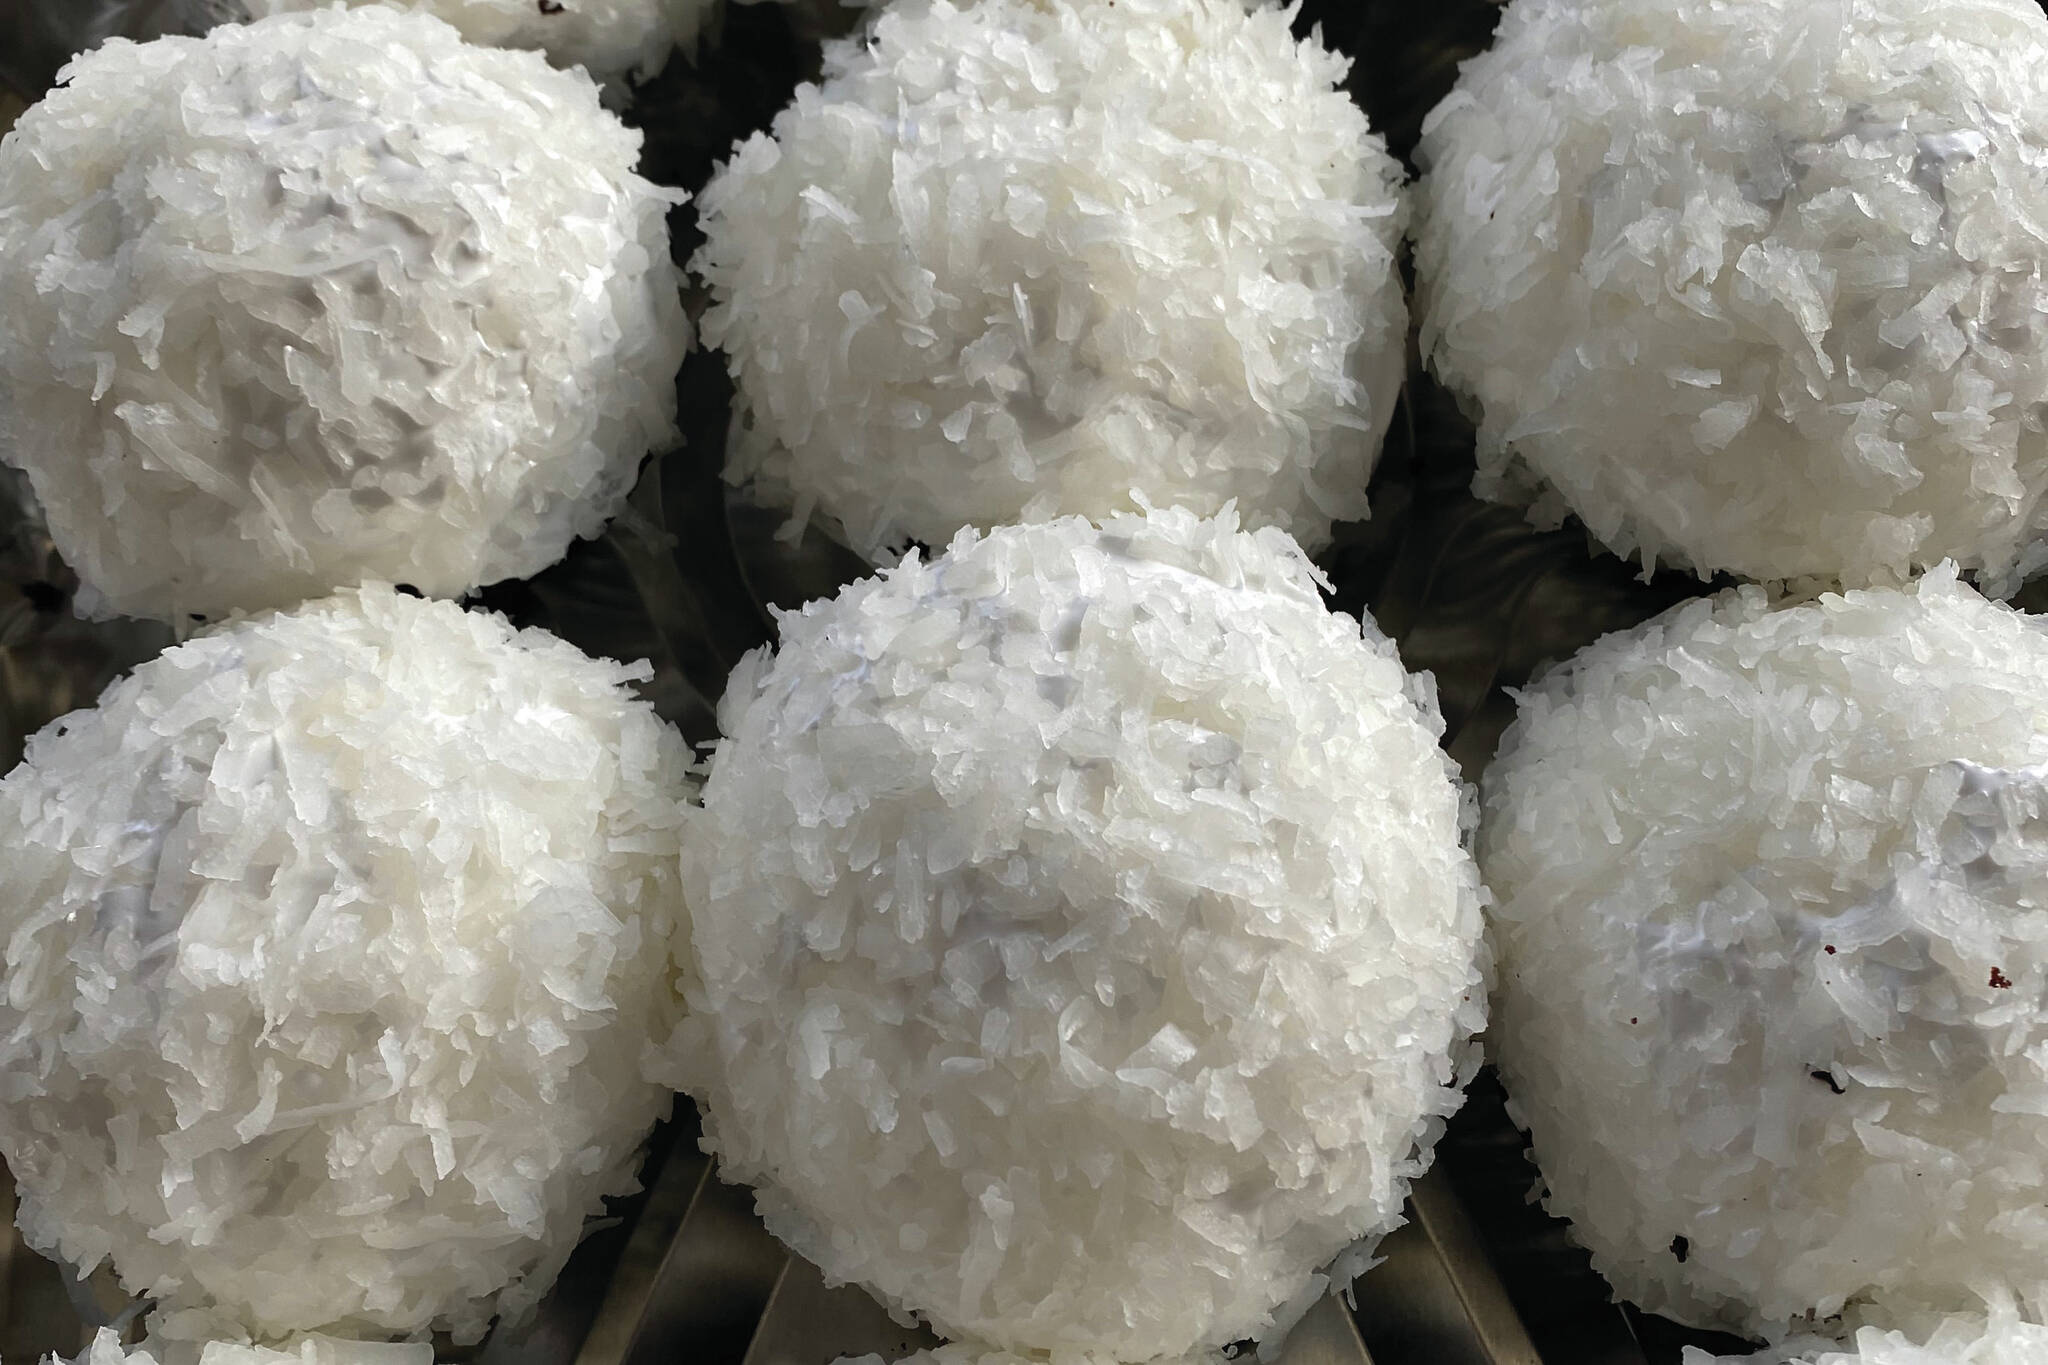 These snowballs are made of chocolate cupcakes are surrounded with sugary meringue and coconut flakes. (Photo by Tressa Dale/Peninsula Clarion)